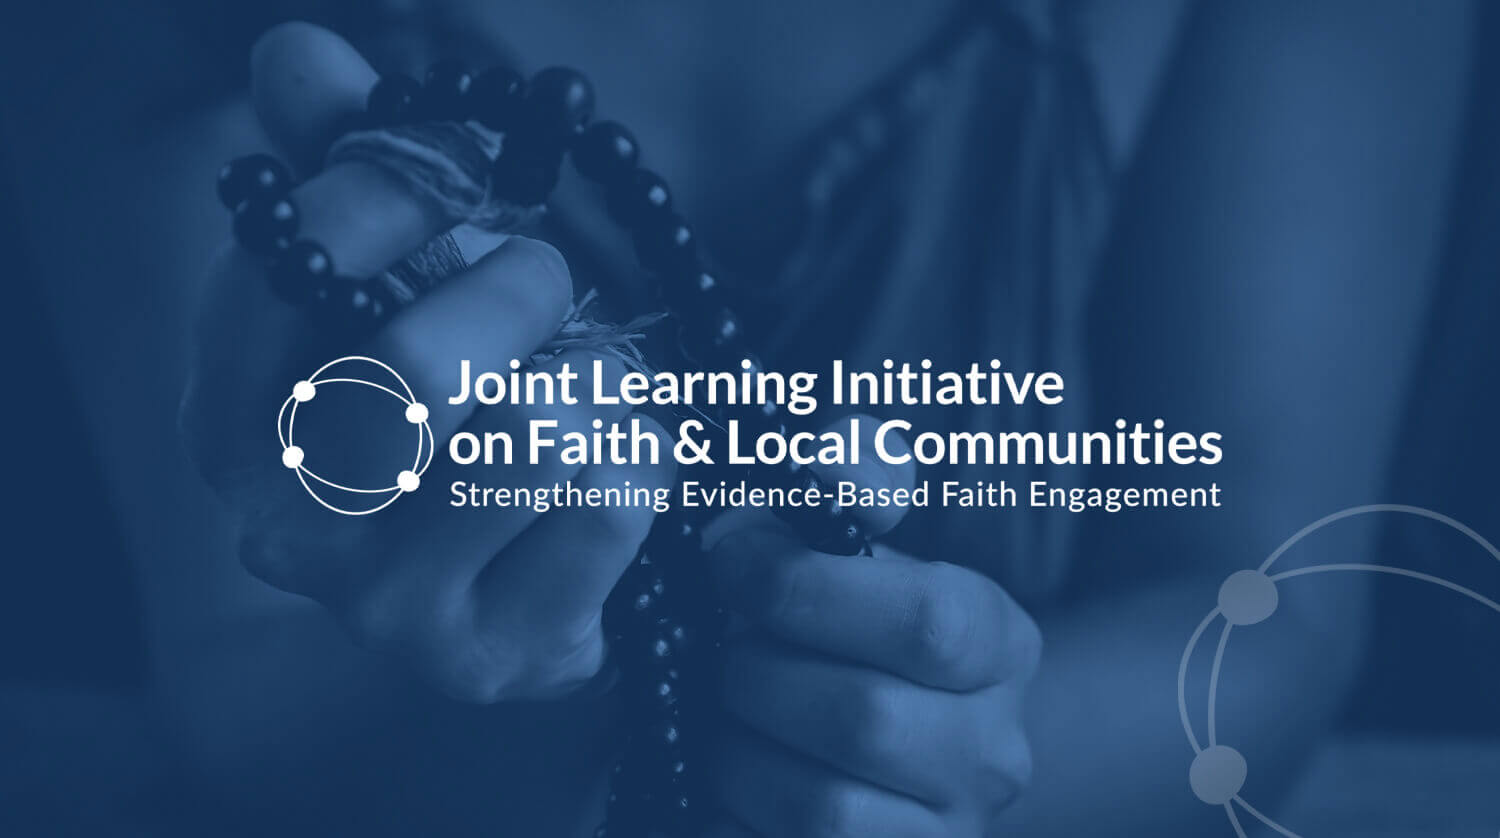 JLI is looking for a Regional Coordinator in Africa for the Faith & Positive Change for Children Initiative